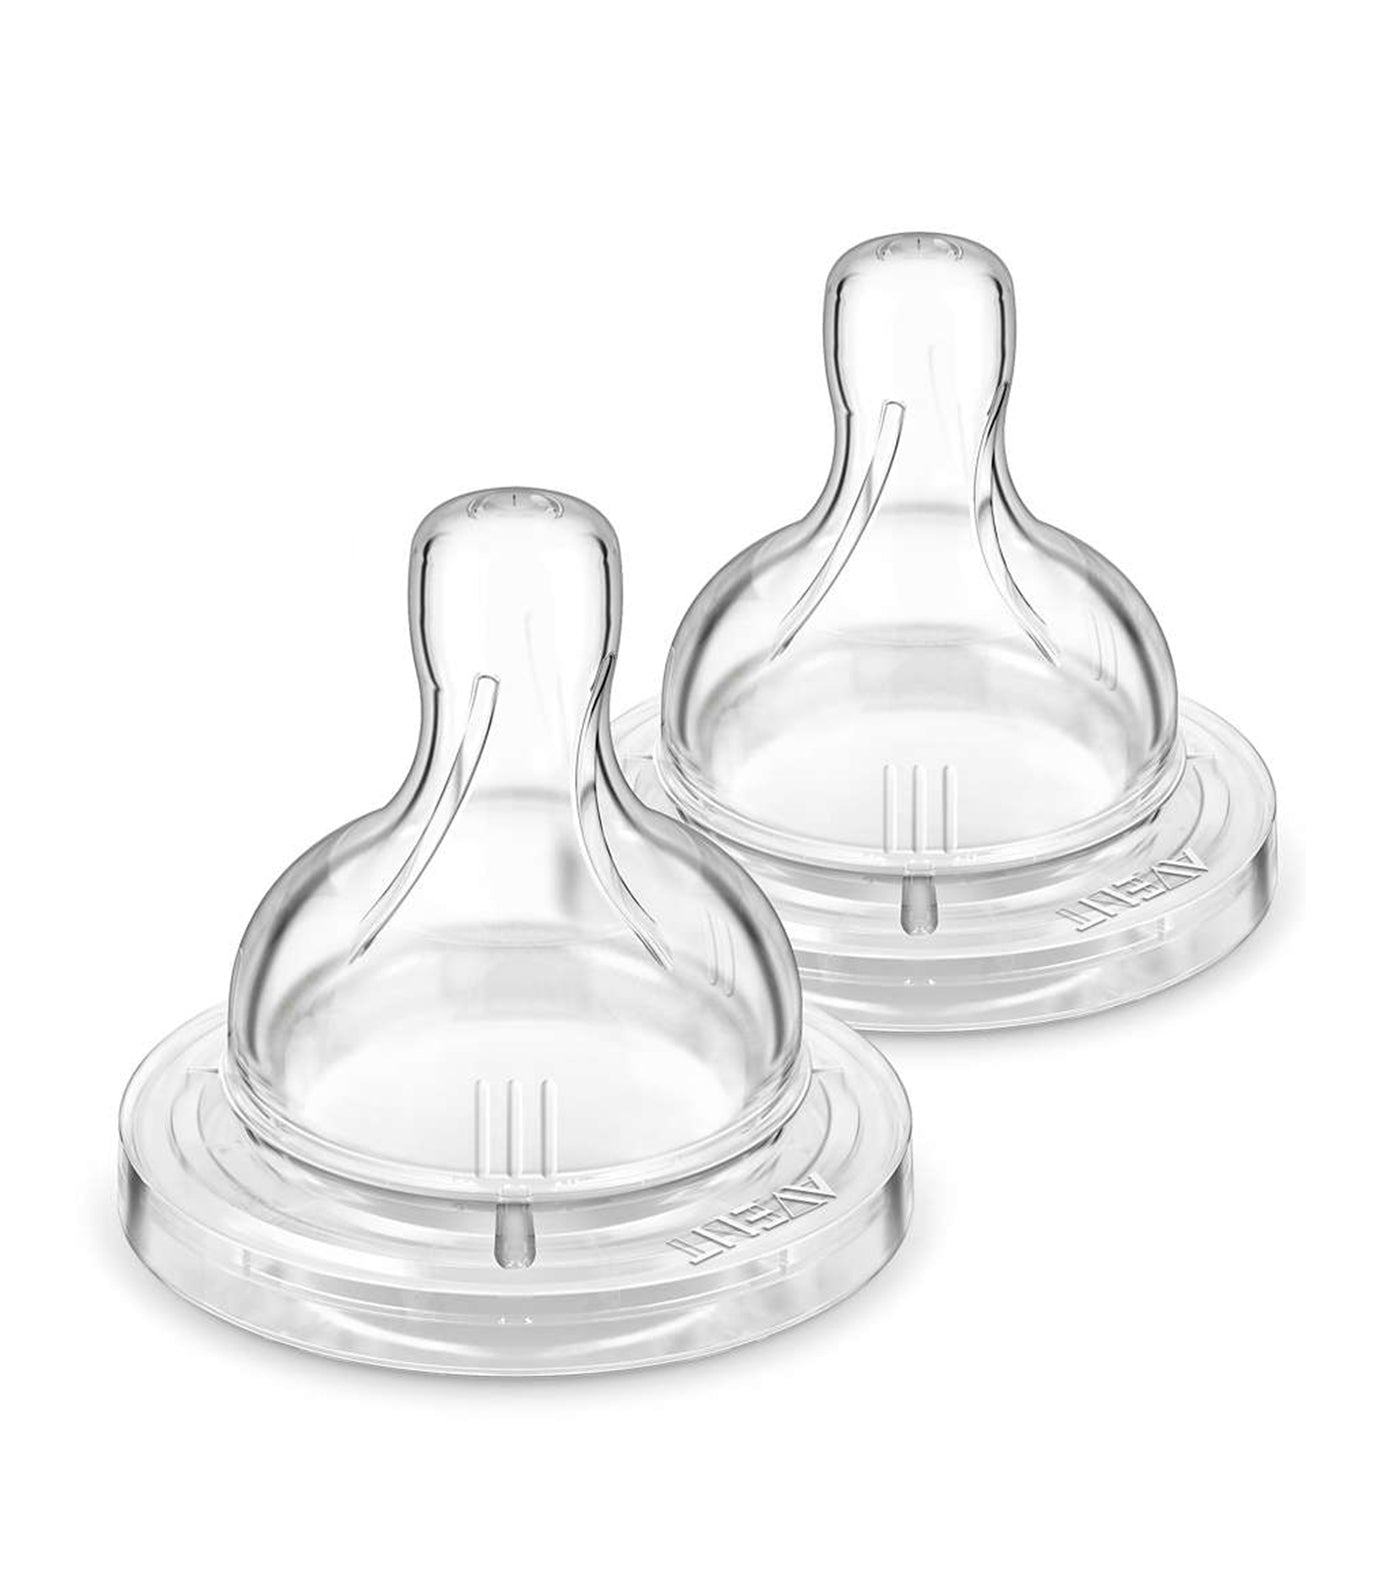 philips avent anti-colic variable flow teats